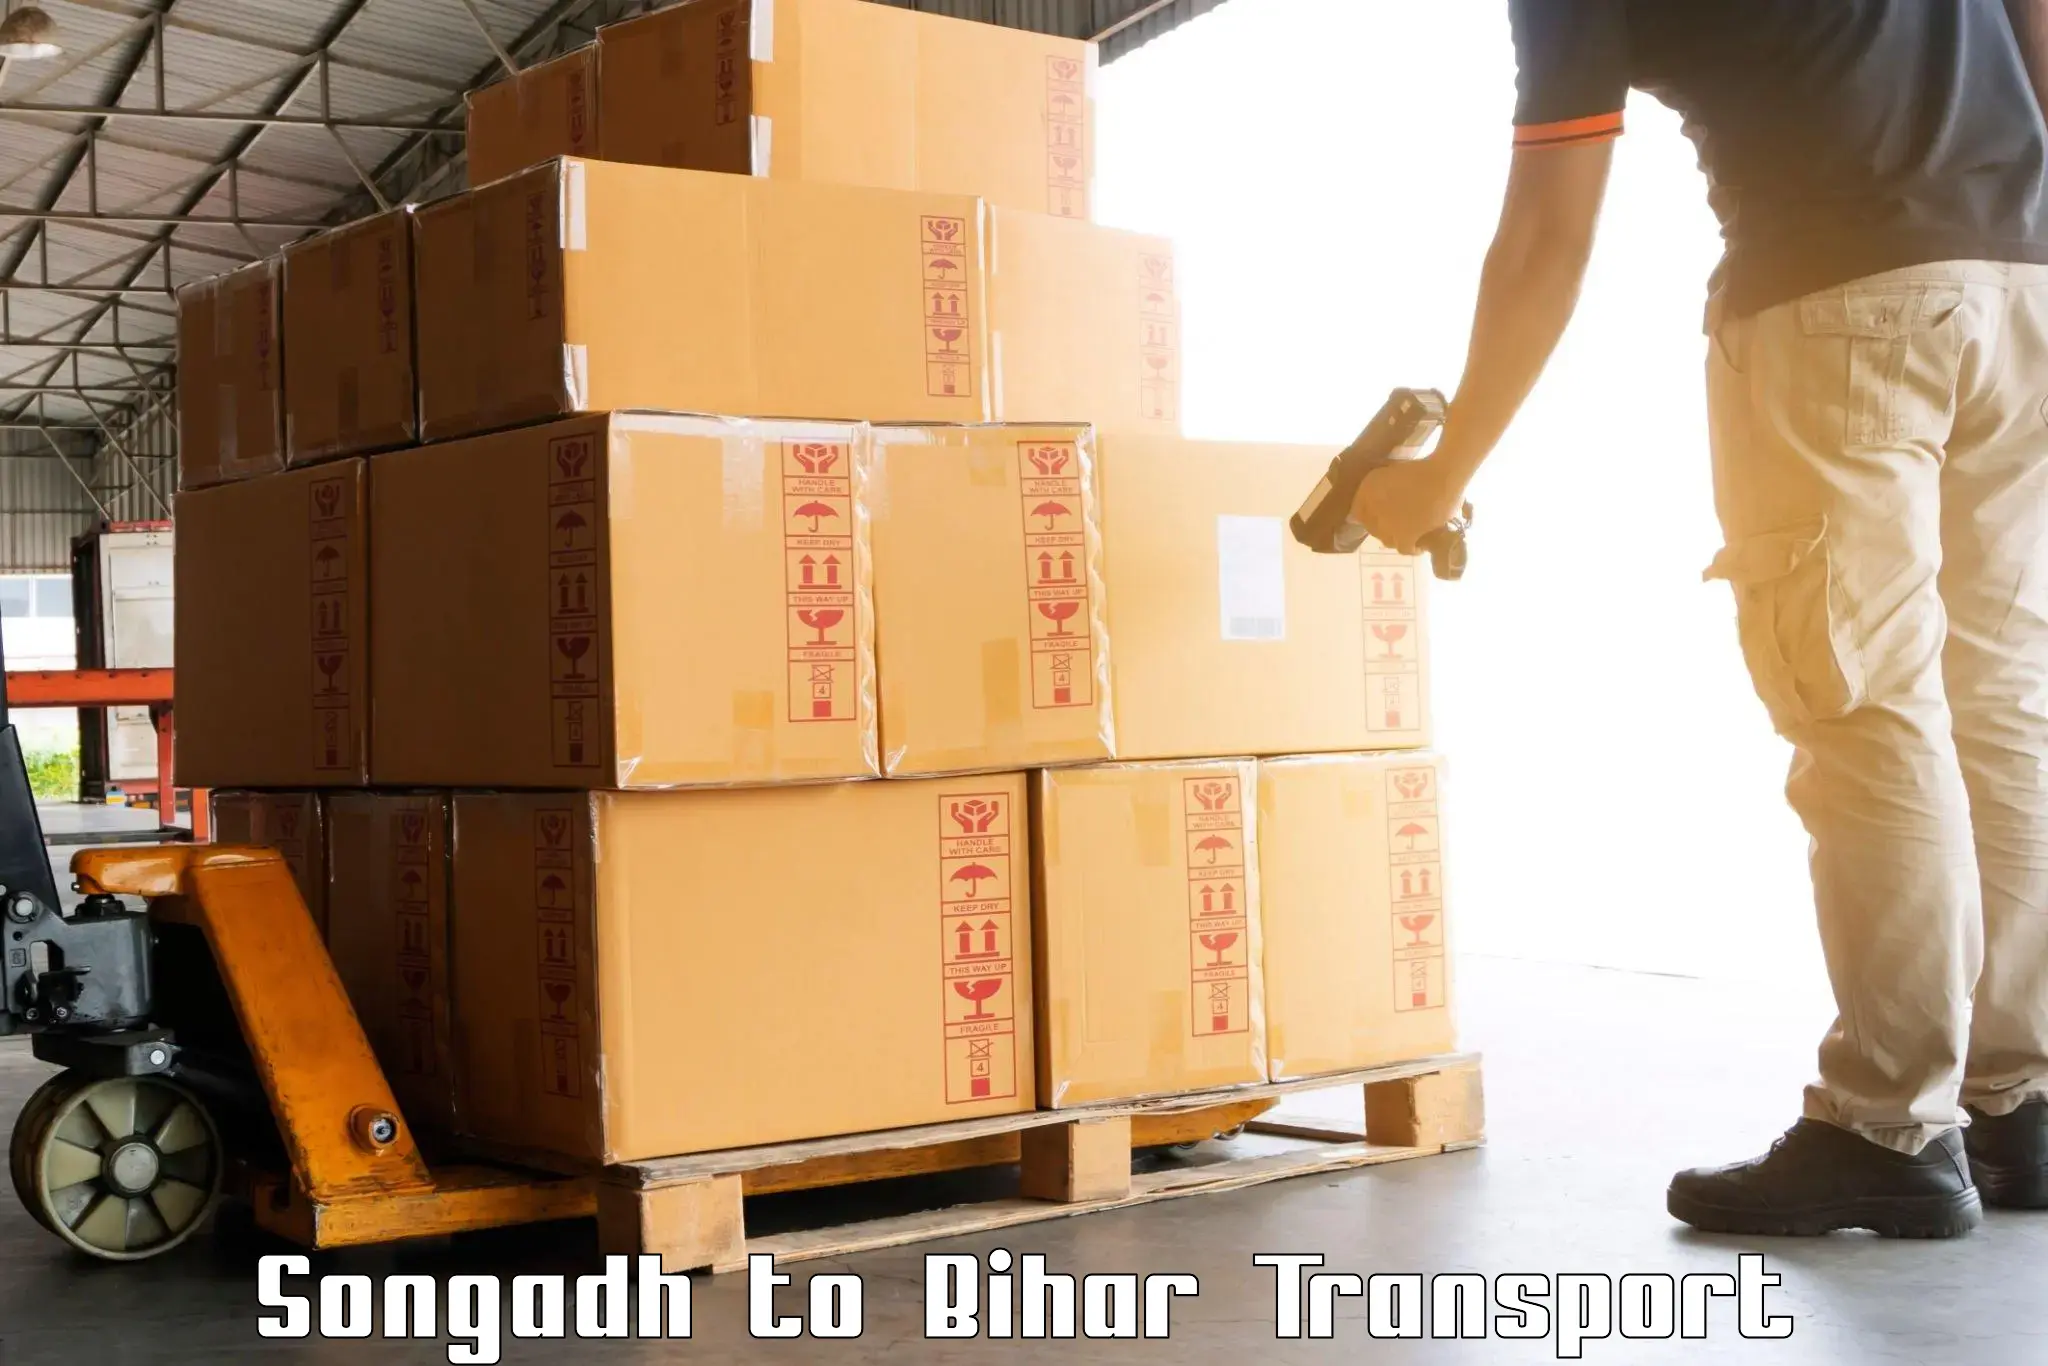 Land transport services Songadh to Dhaka